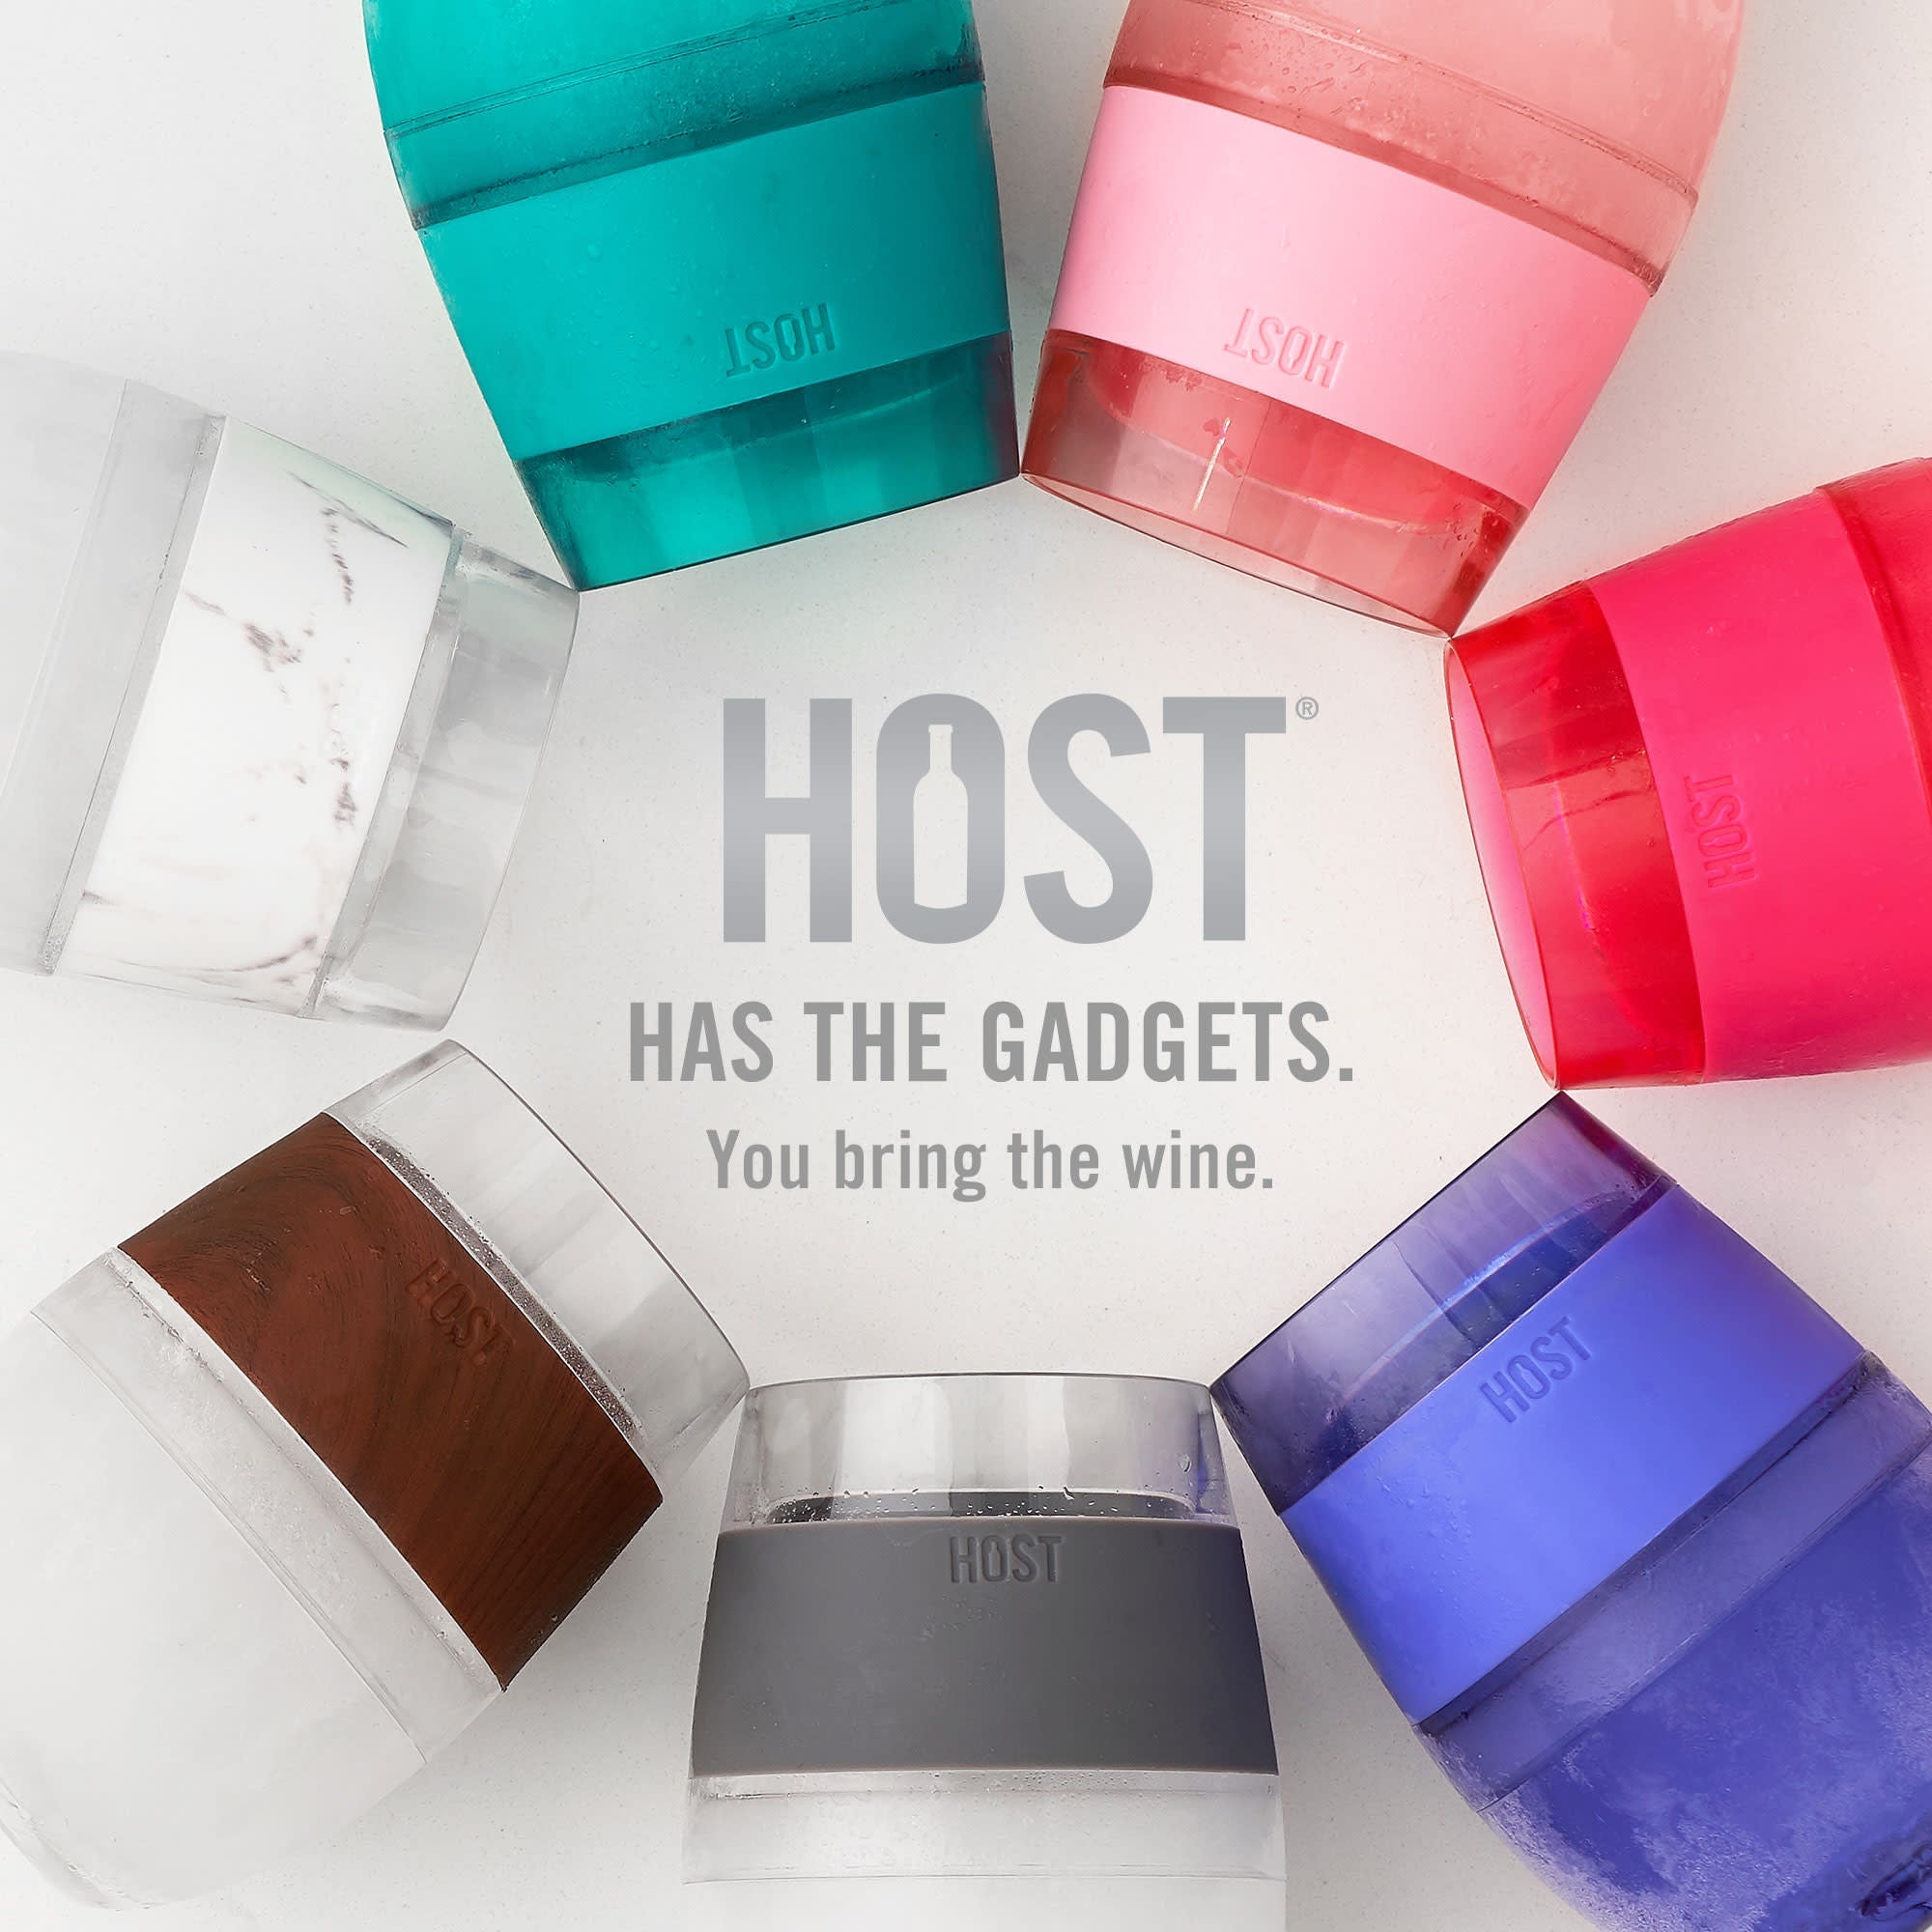 Wine FREEZE Translucent Cooling Cups by HOST